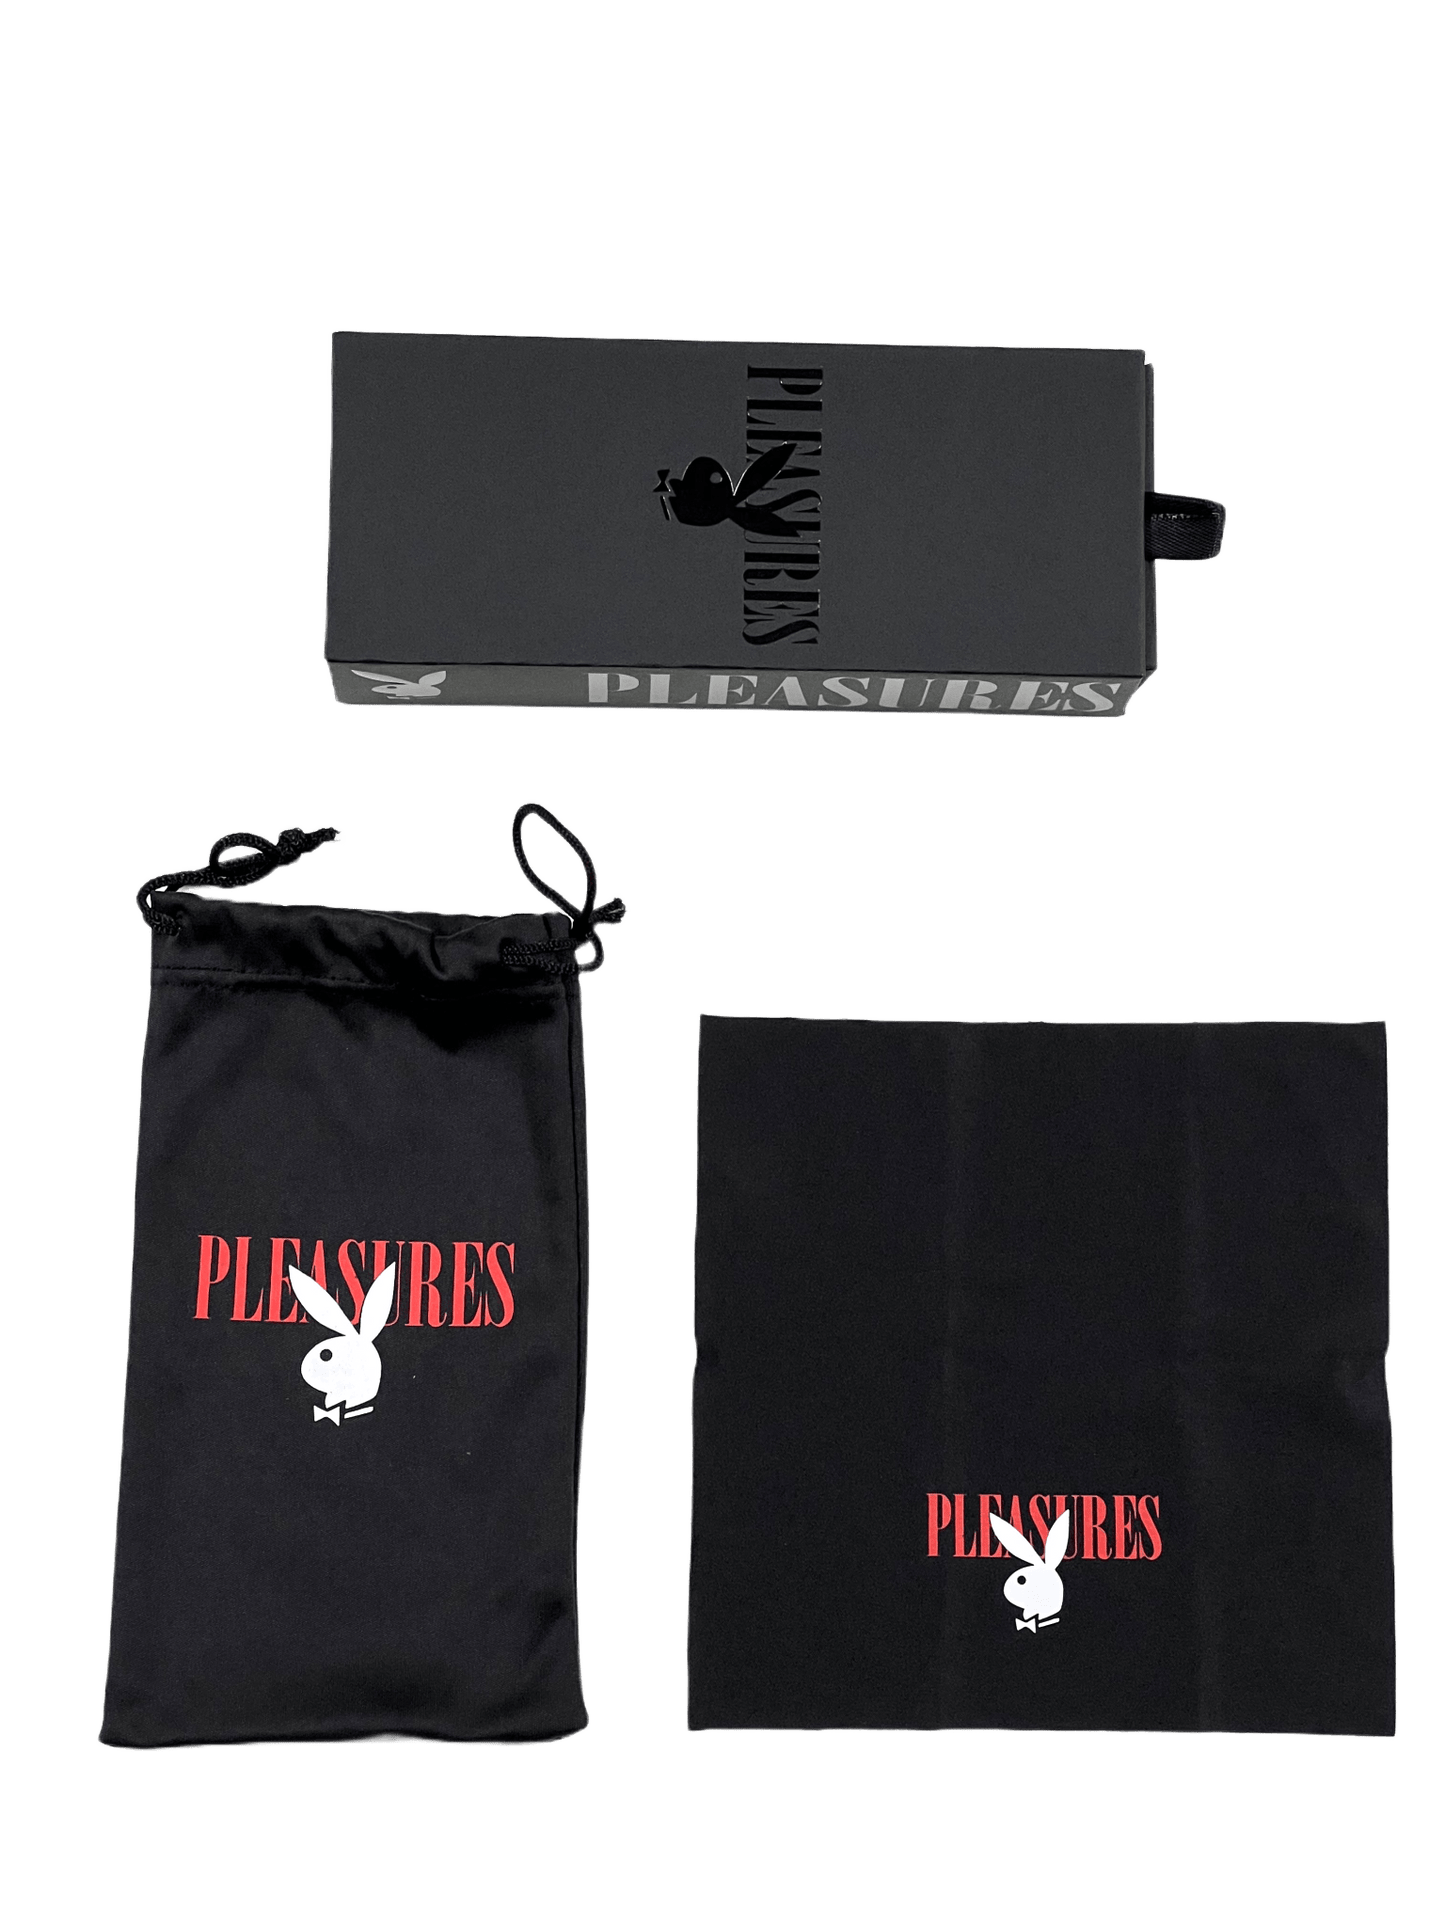 A black PLEASURES sunglasses pouch with a black bag and a logo on it.